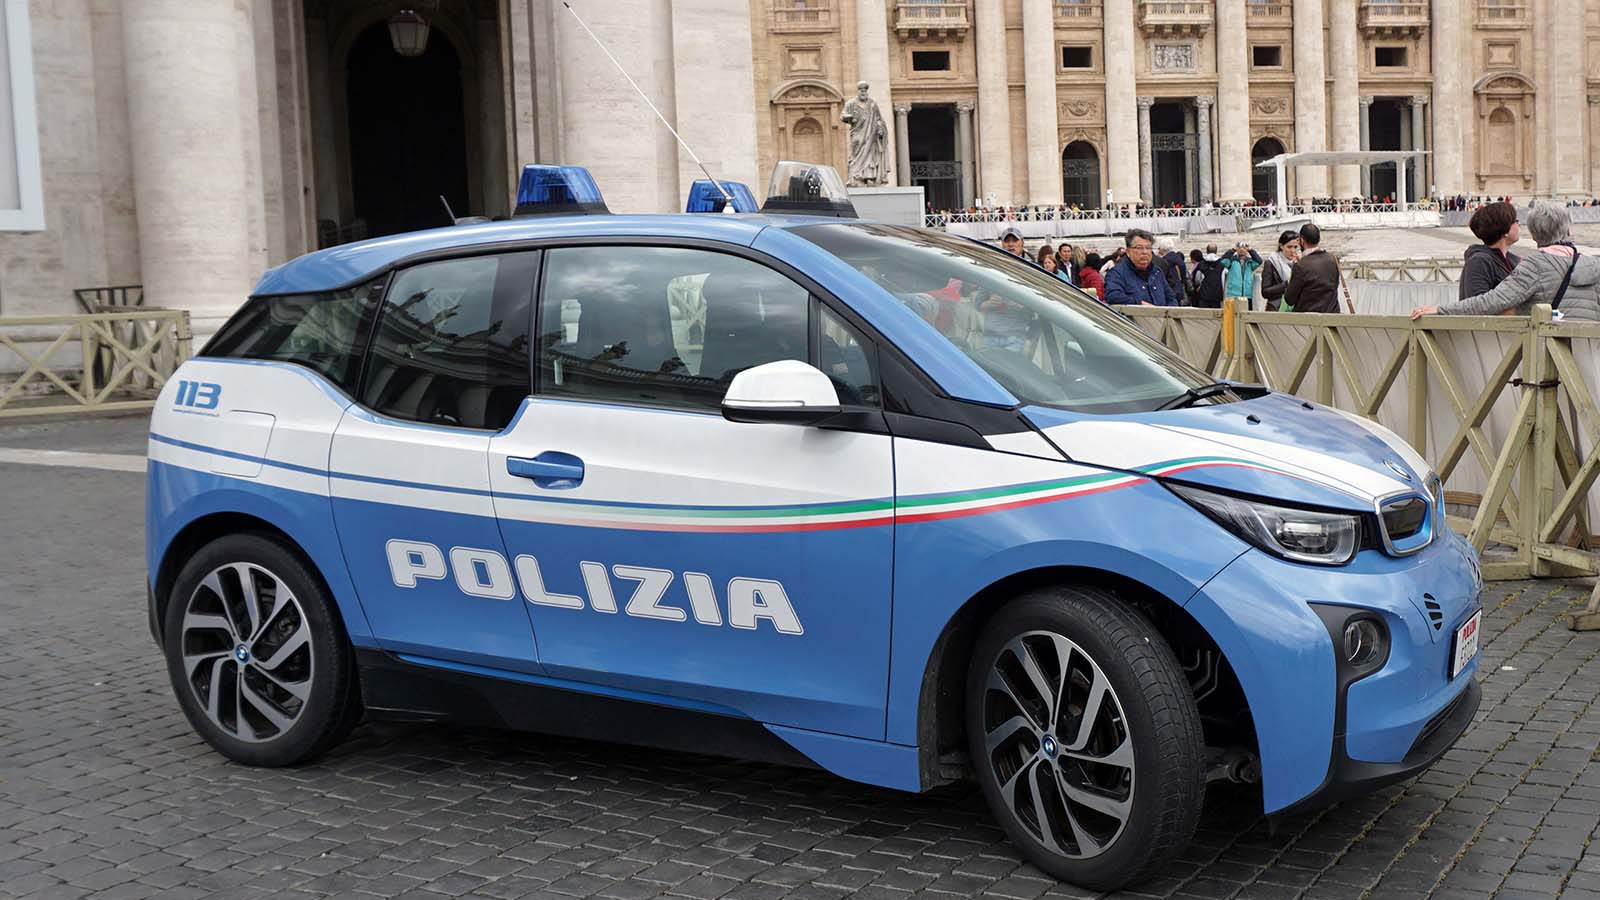 The world's most interesting electric police cars